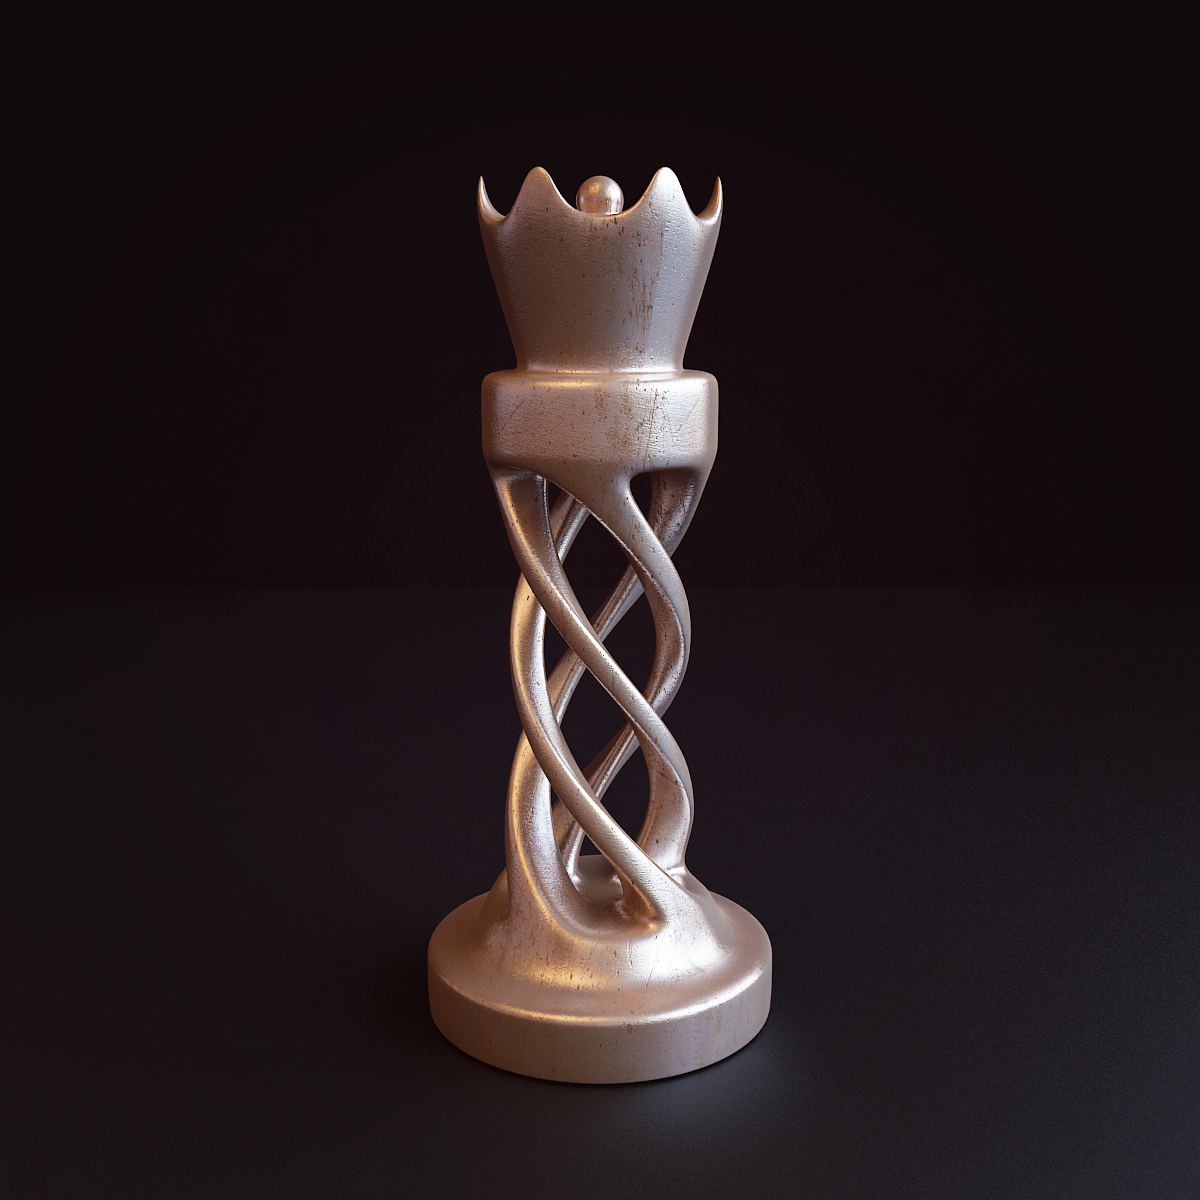 webshocker chess art modeling Render game abstract Pawn knight bishop queen king 3dprint